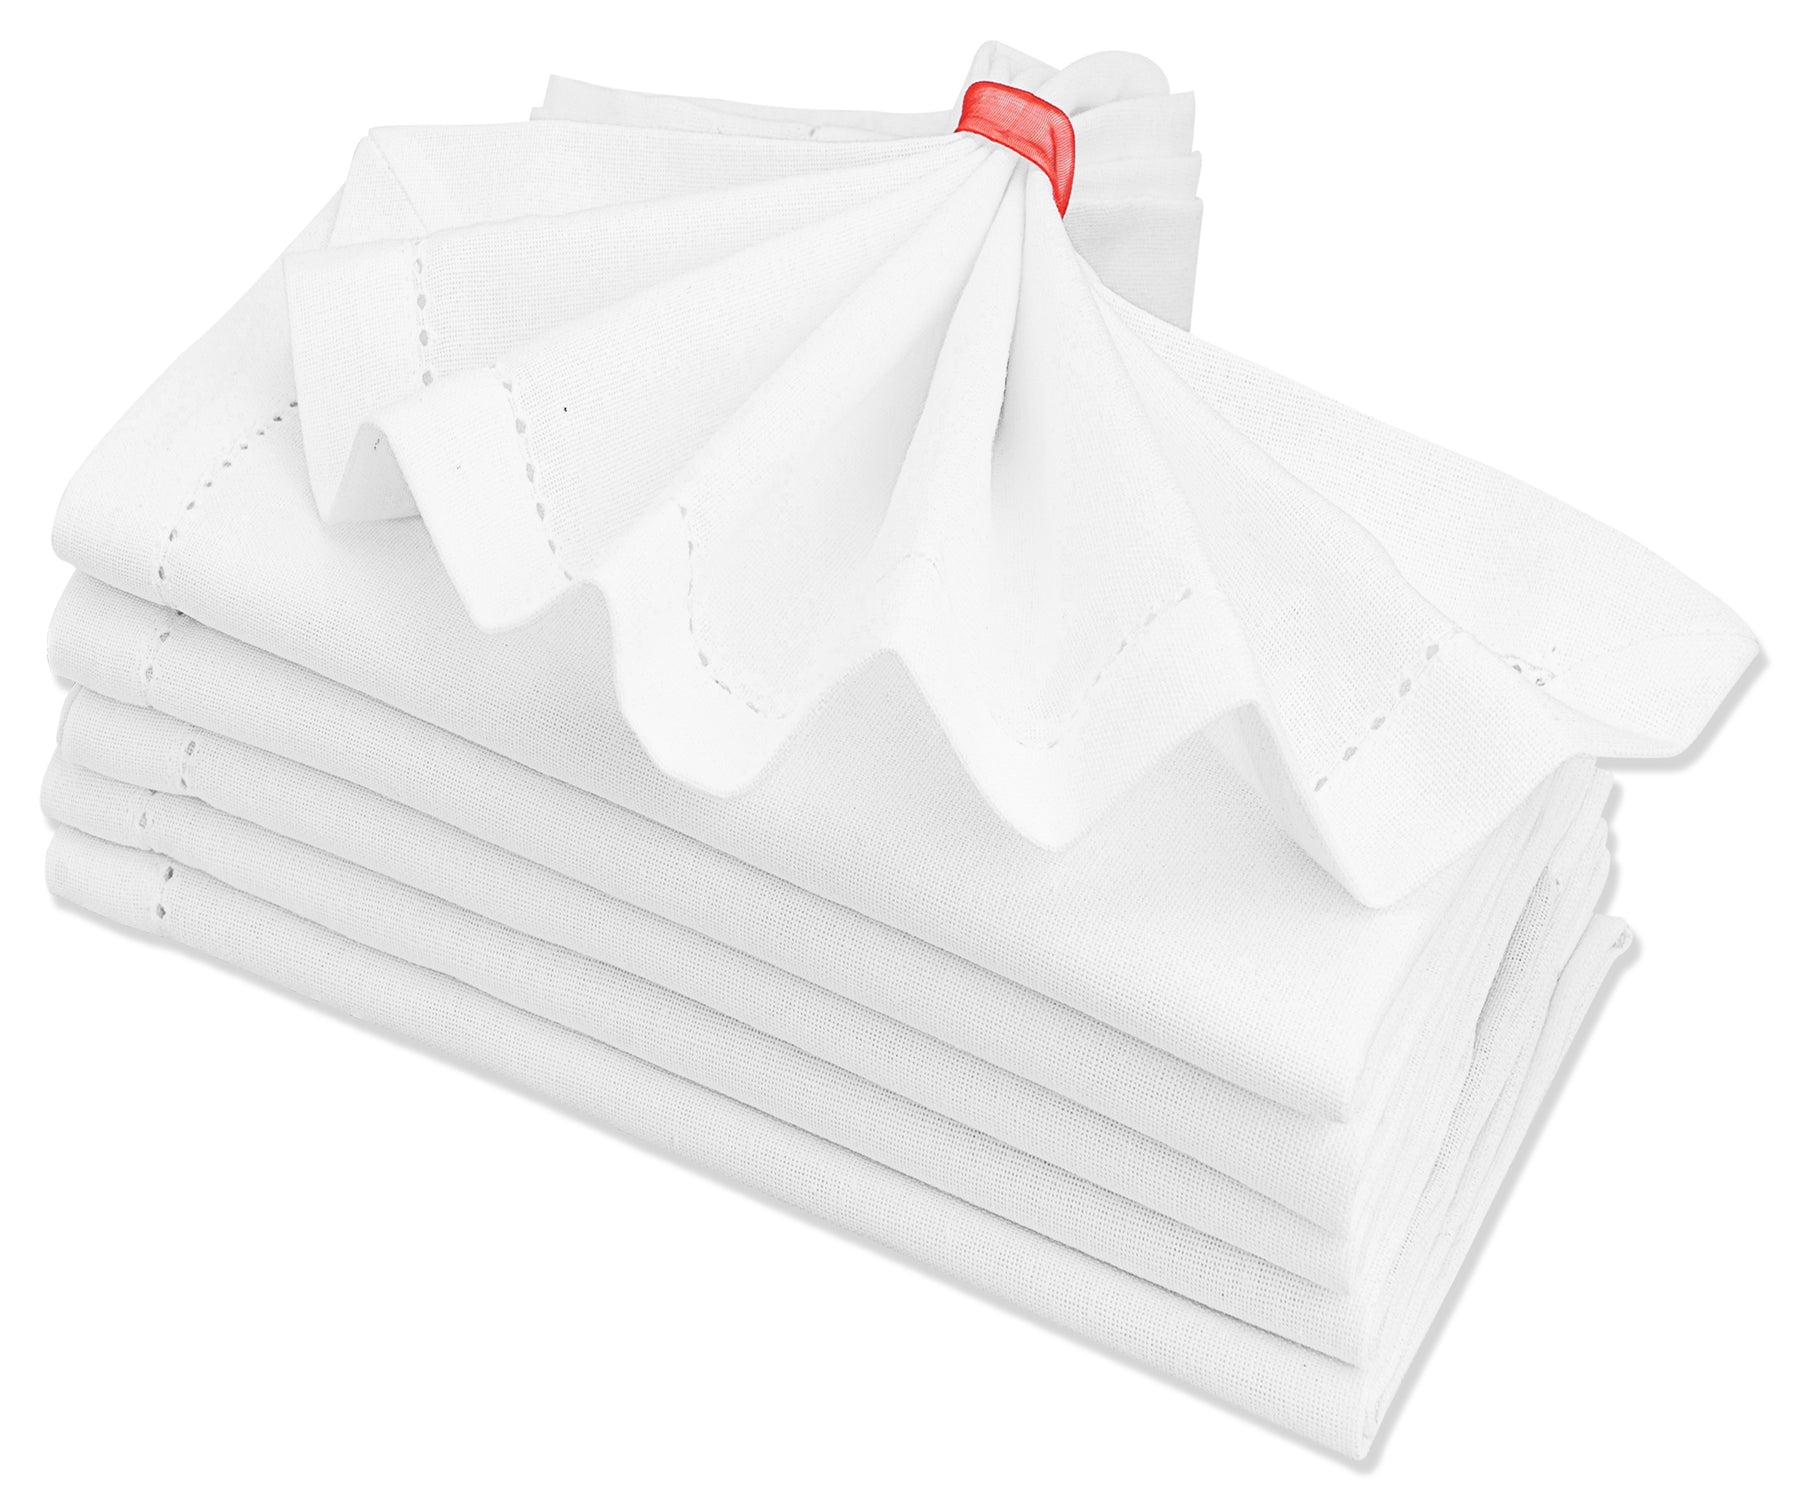 Experience luxury with the soft and refined feel of our Cloth Napkin.